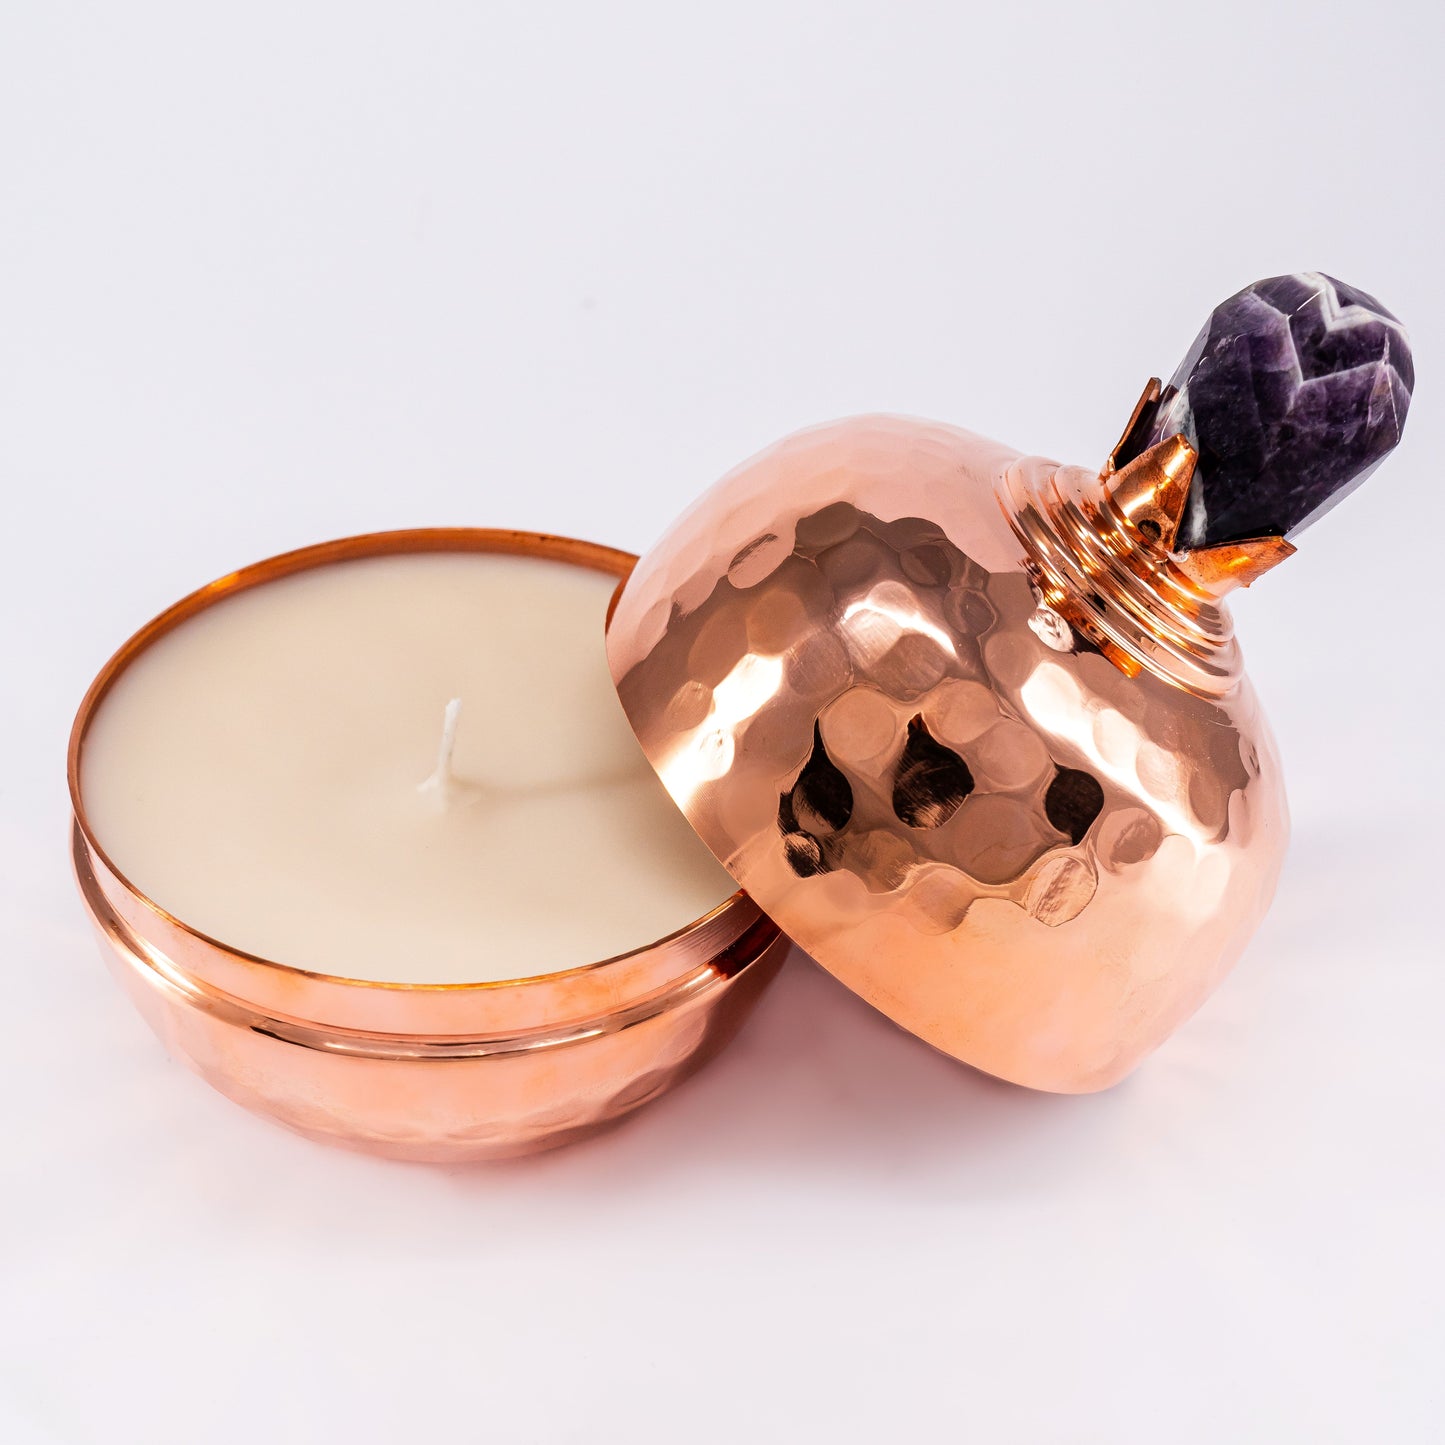 SURYA hand poured scented candle in handmade copper container with gemstone